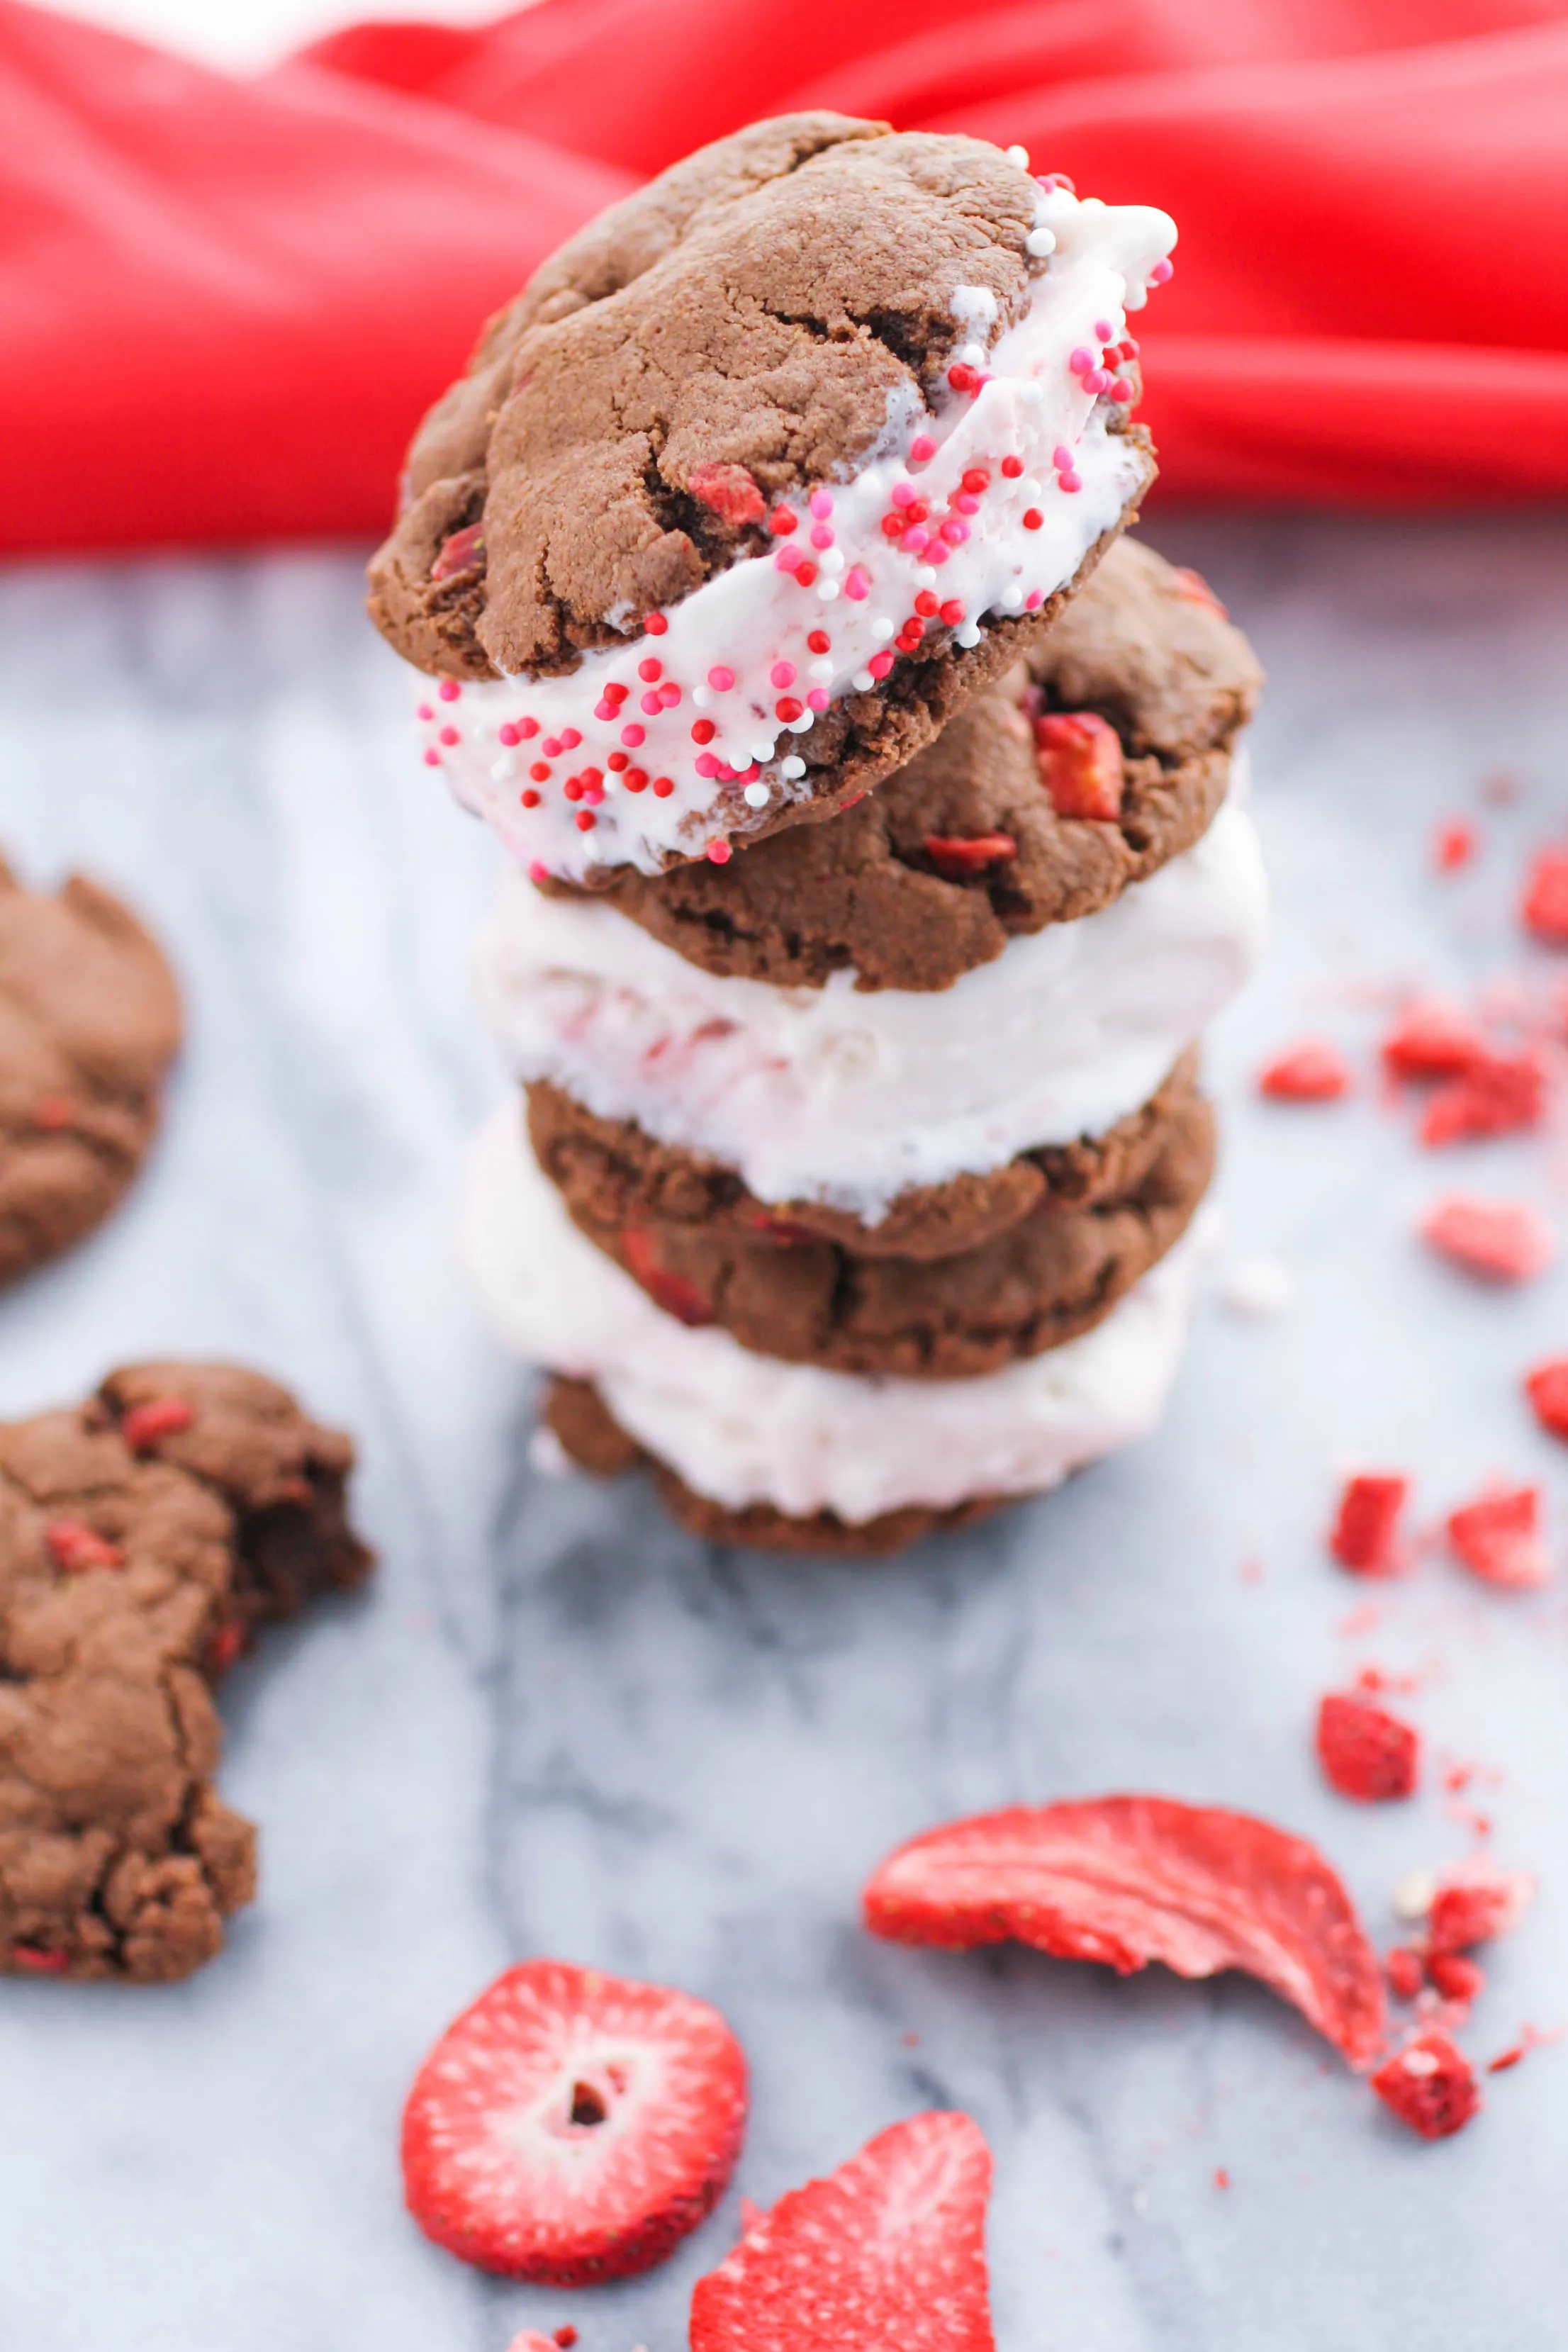 Strawberry-Nutella Cookie Ice Cream Sandwiches are such a fun treat! You'll love these Strawberry-Nutella cookies, and the ice cream sandwiches.